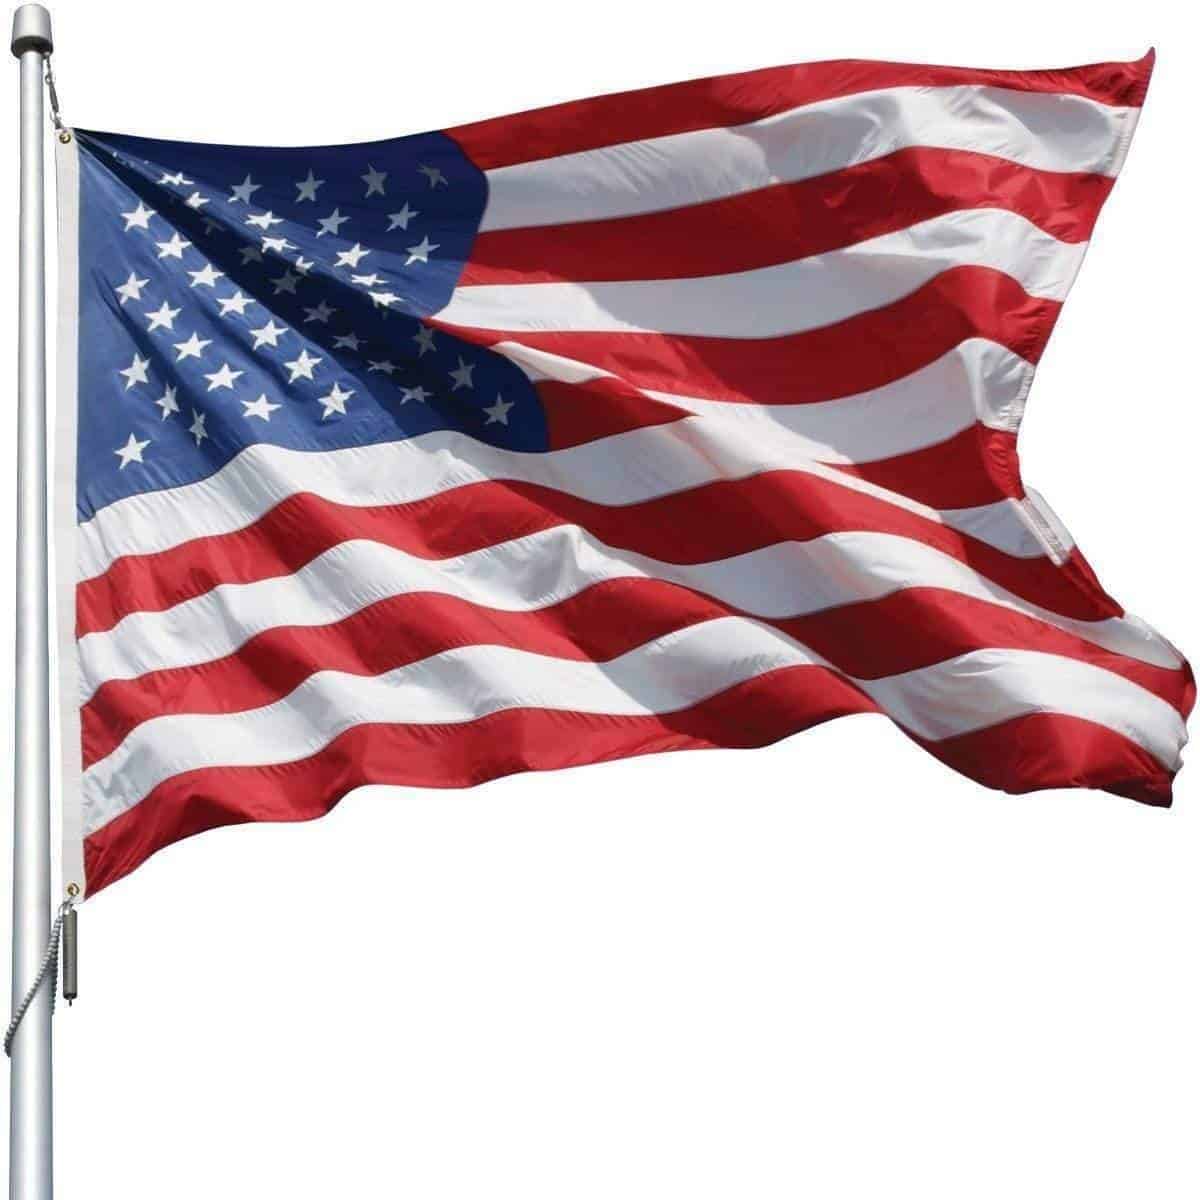 *USA MADE HEAVY DUTY 3x5 US AMERICA EMBROIDERED&SEWN 600D 2PLY/SIDED FLAG BANNER 